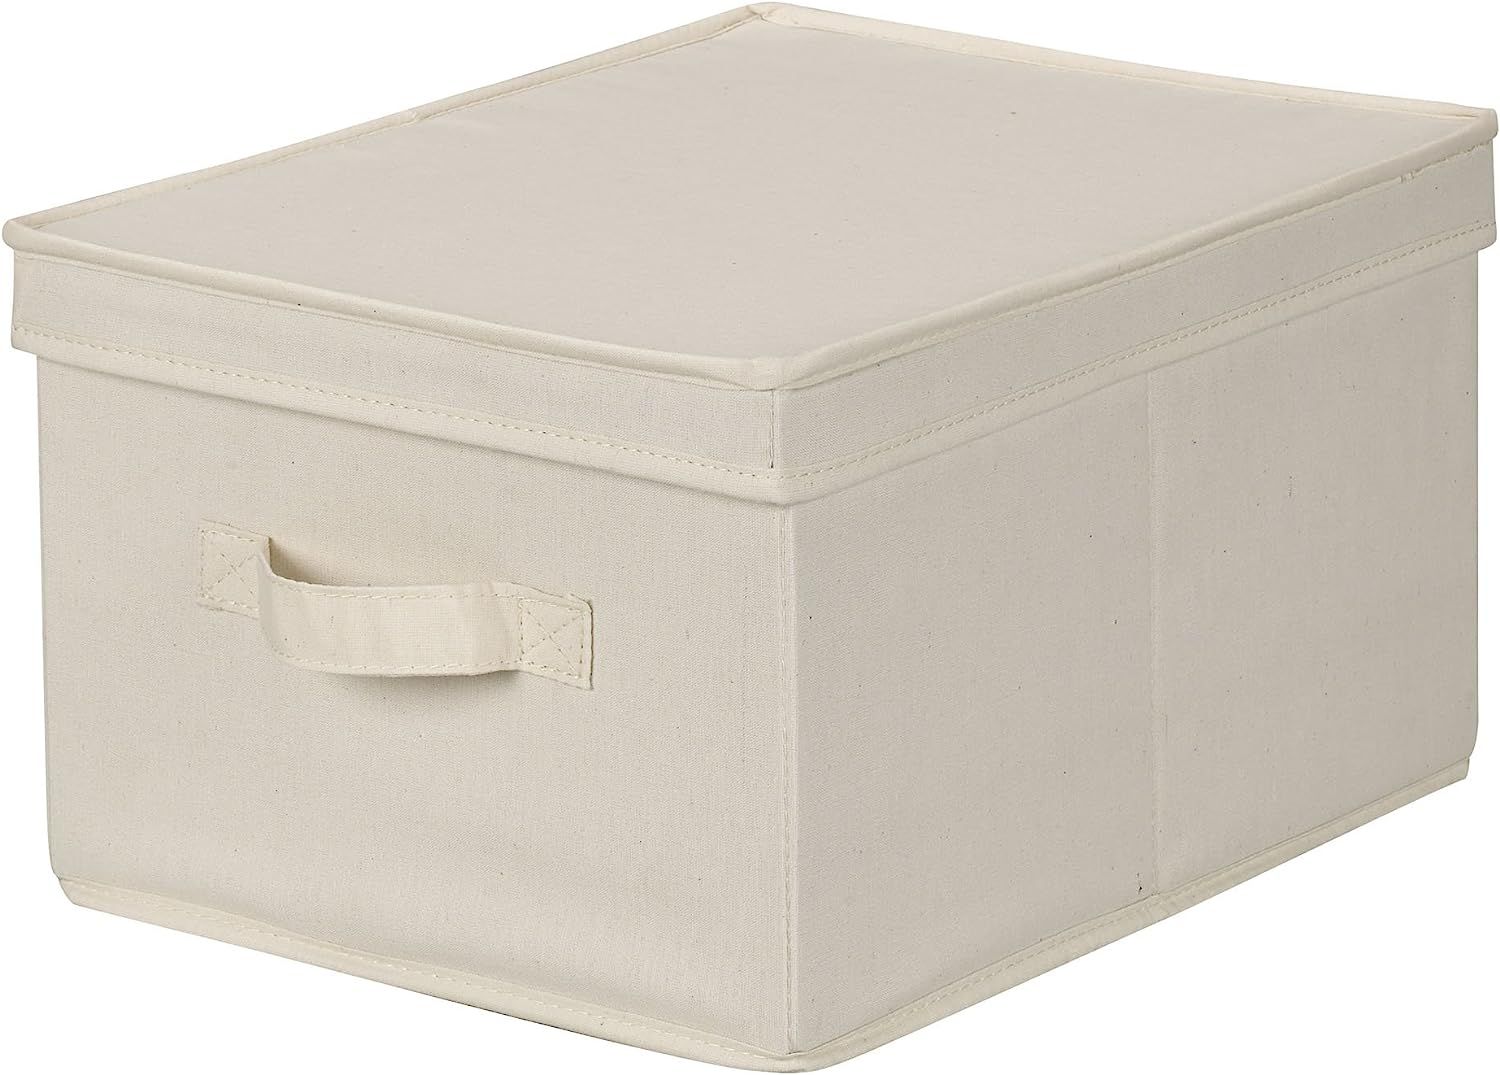 Household Essentials 113 Storage Box with Lid and Handle - Natural Beige Canvas - Large | Amazon (US)